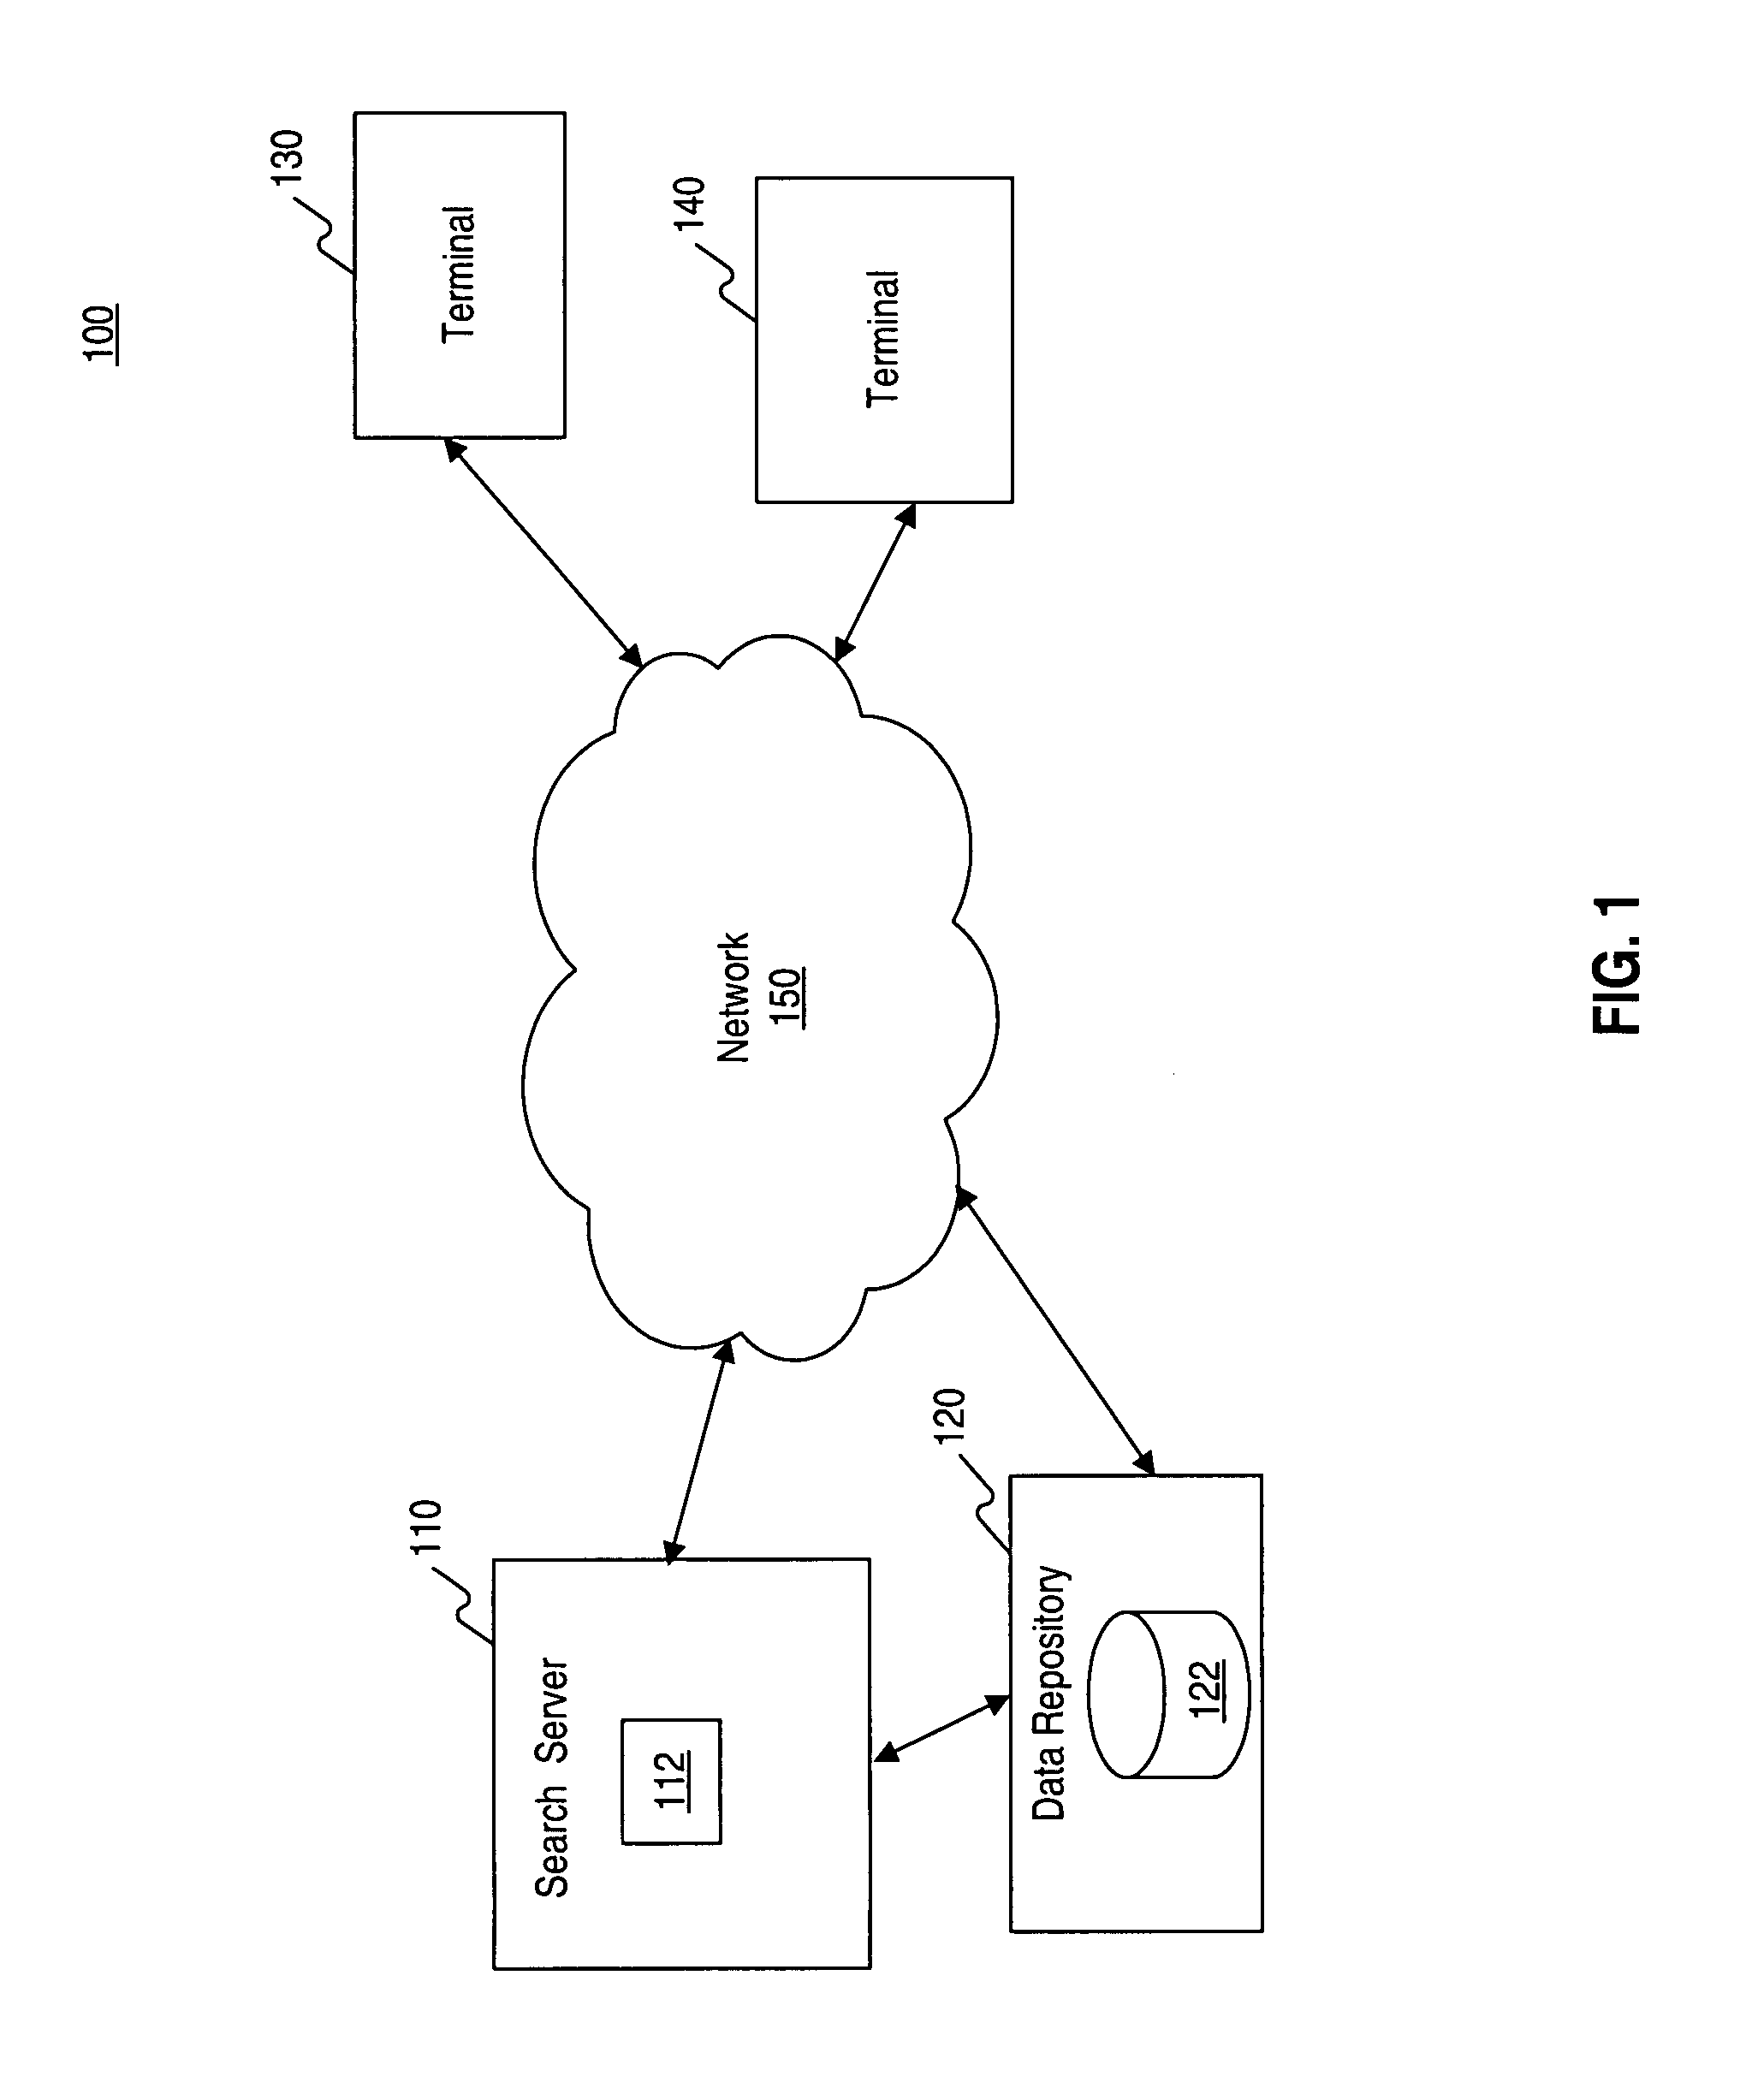 Multi-entity ontology weighting systems and methods